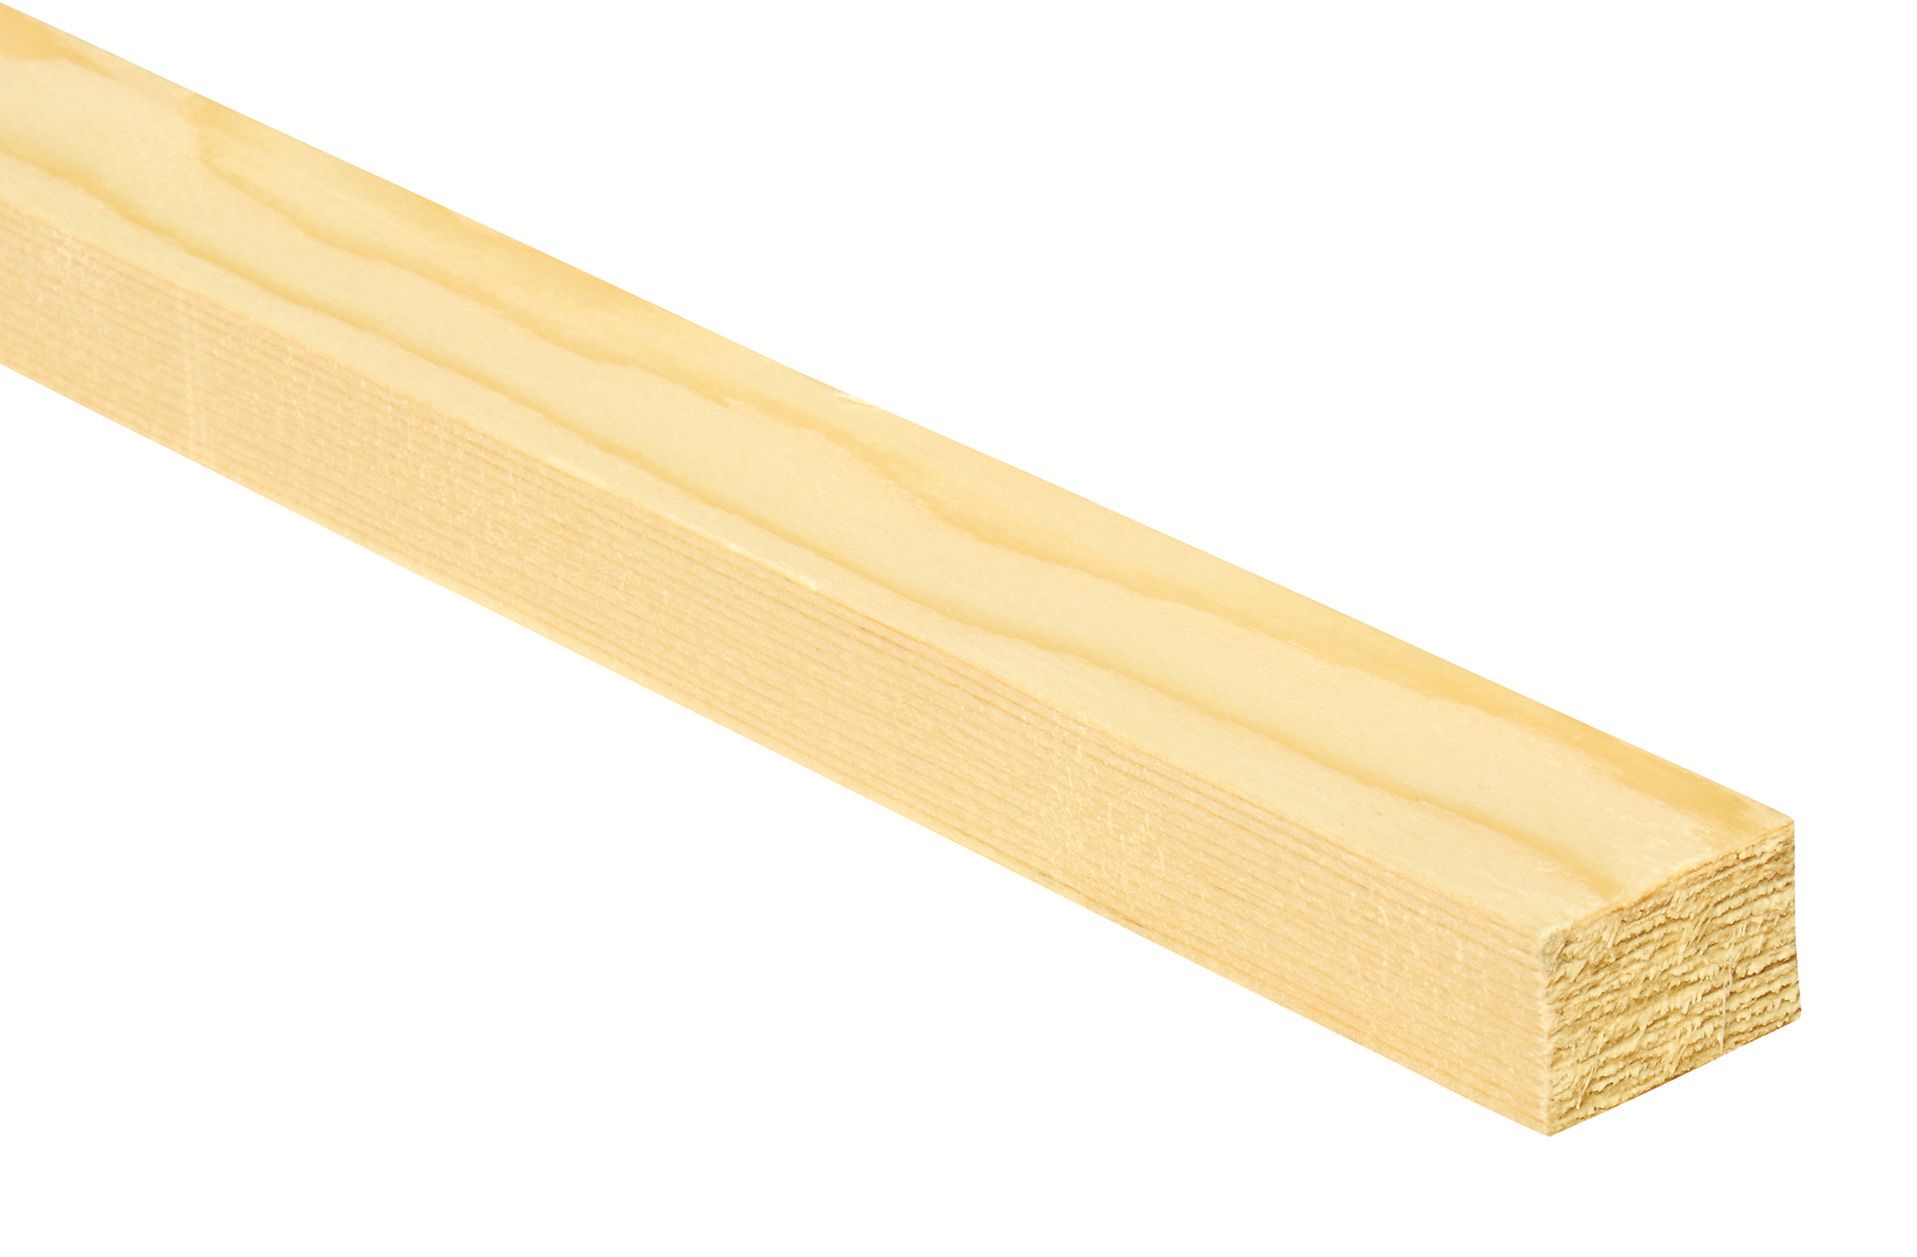 Image of Wickes Whitewood PSE Timber - 18mm x 28mm x 1800mm